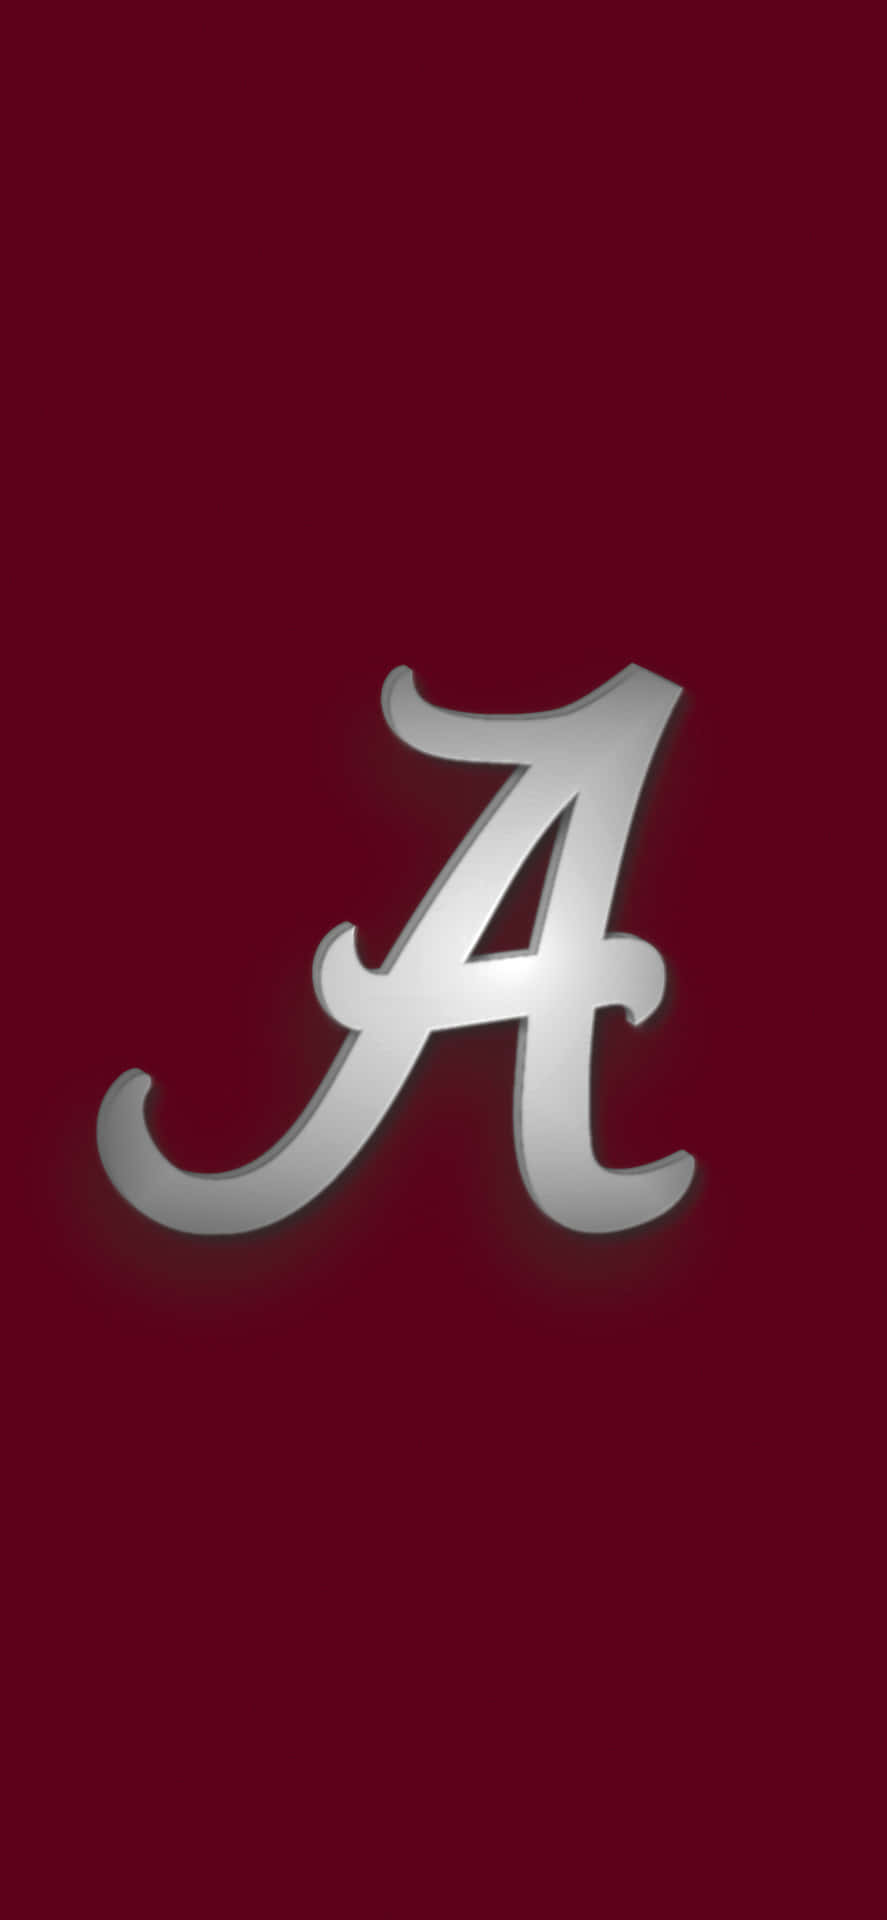 Show Your Support for the Alabama Crimson Tide Wallpaper